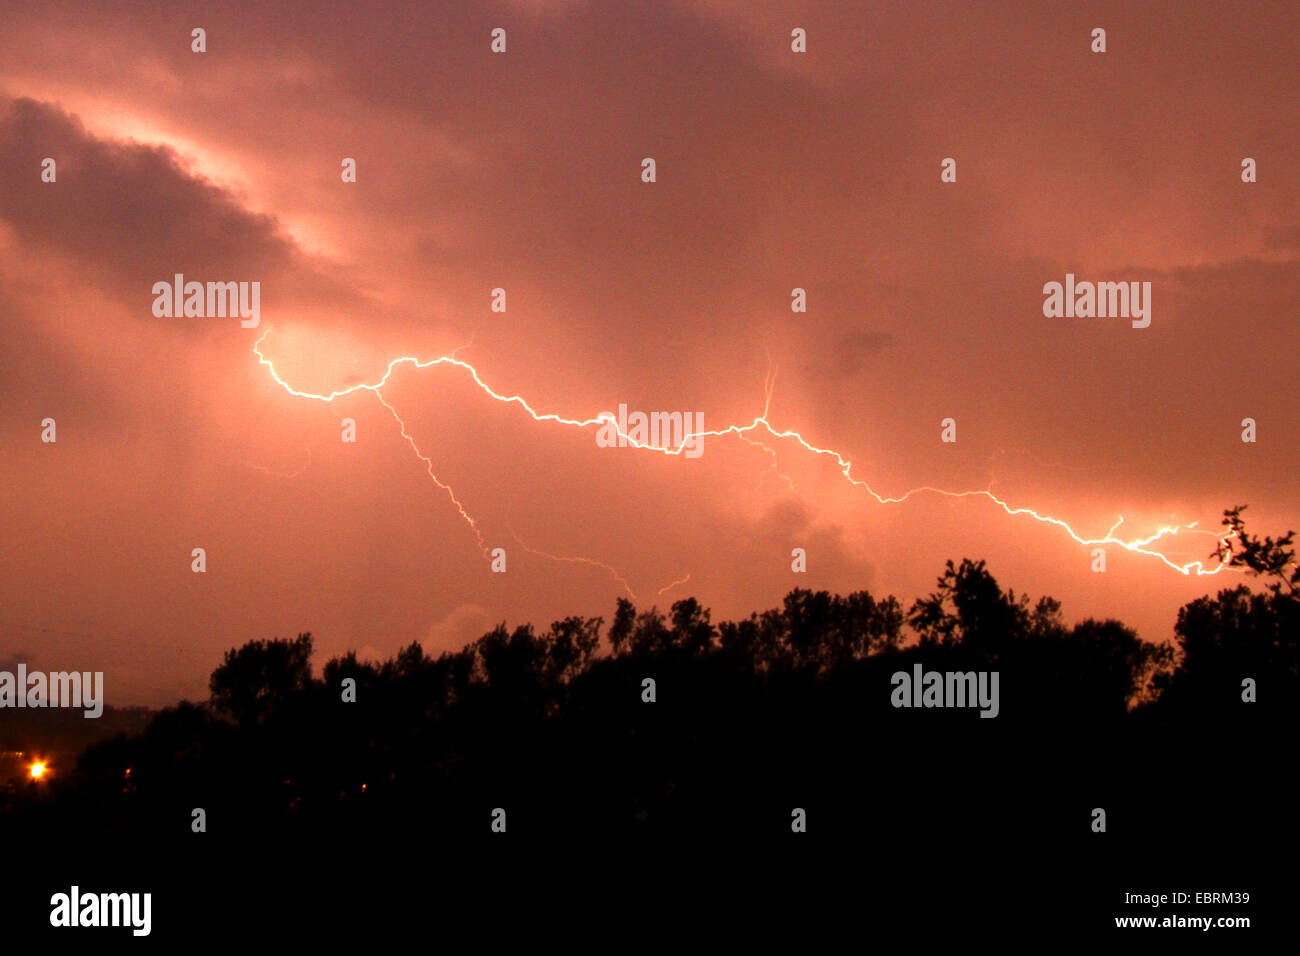 lithing at thunder storm at night, Germany, North Rhine-Westphalia, Ruhr Area, Essen Stock Photo